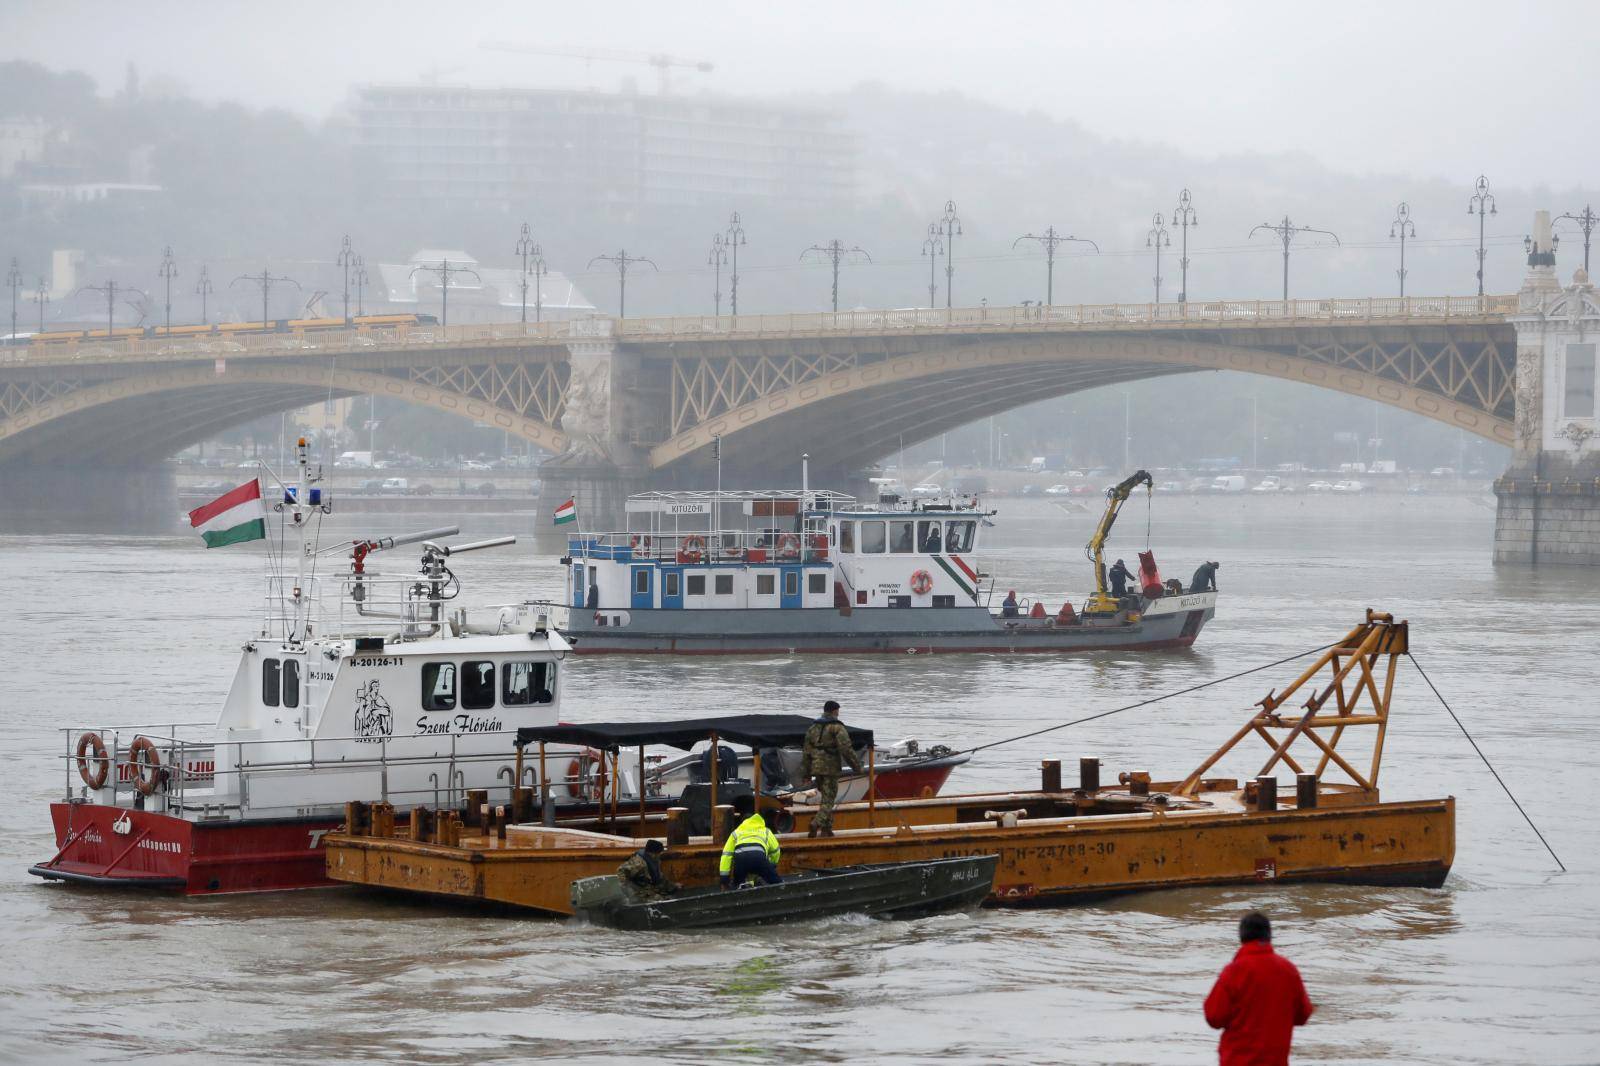 Ship accident on the Danube river in Budapest